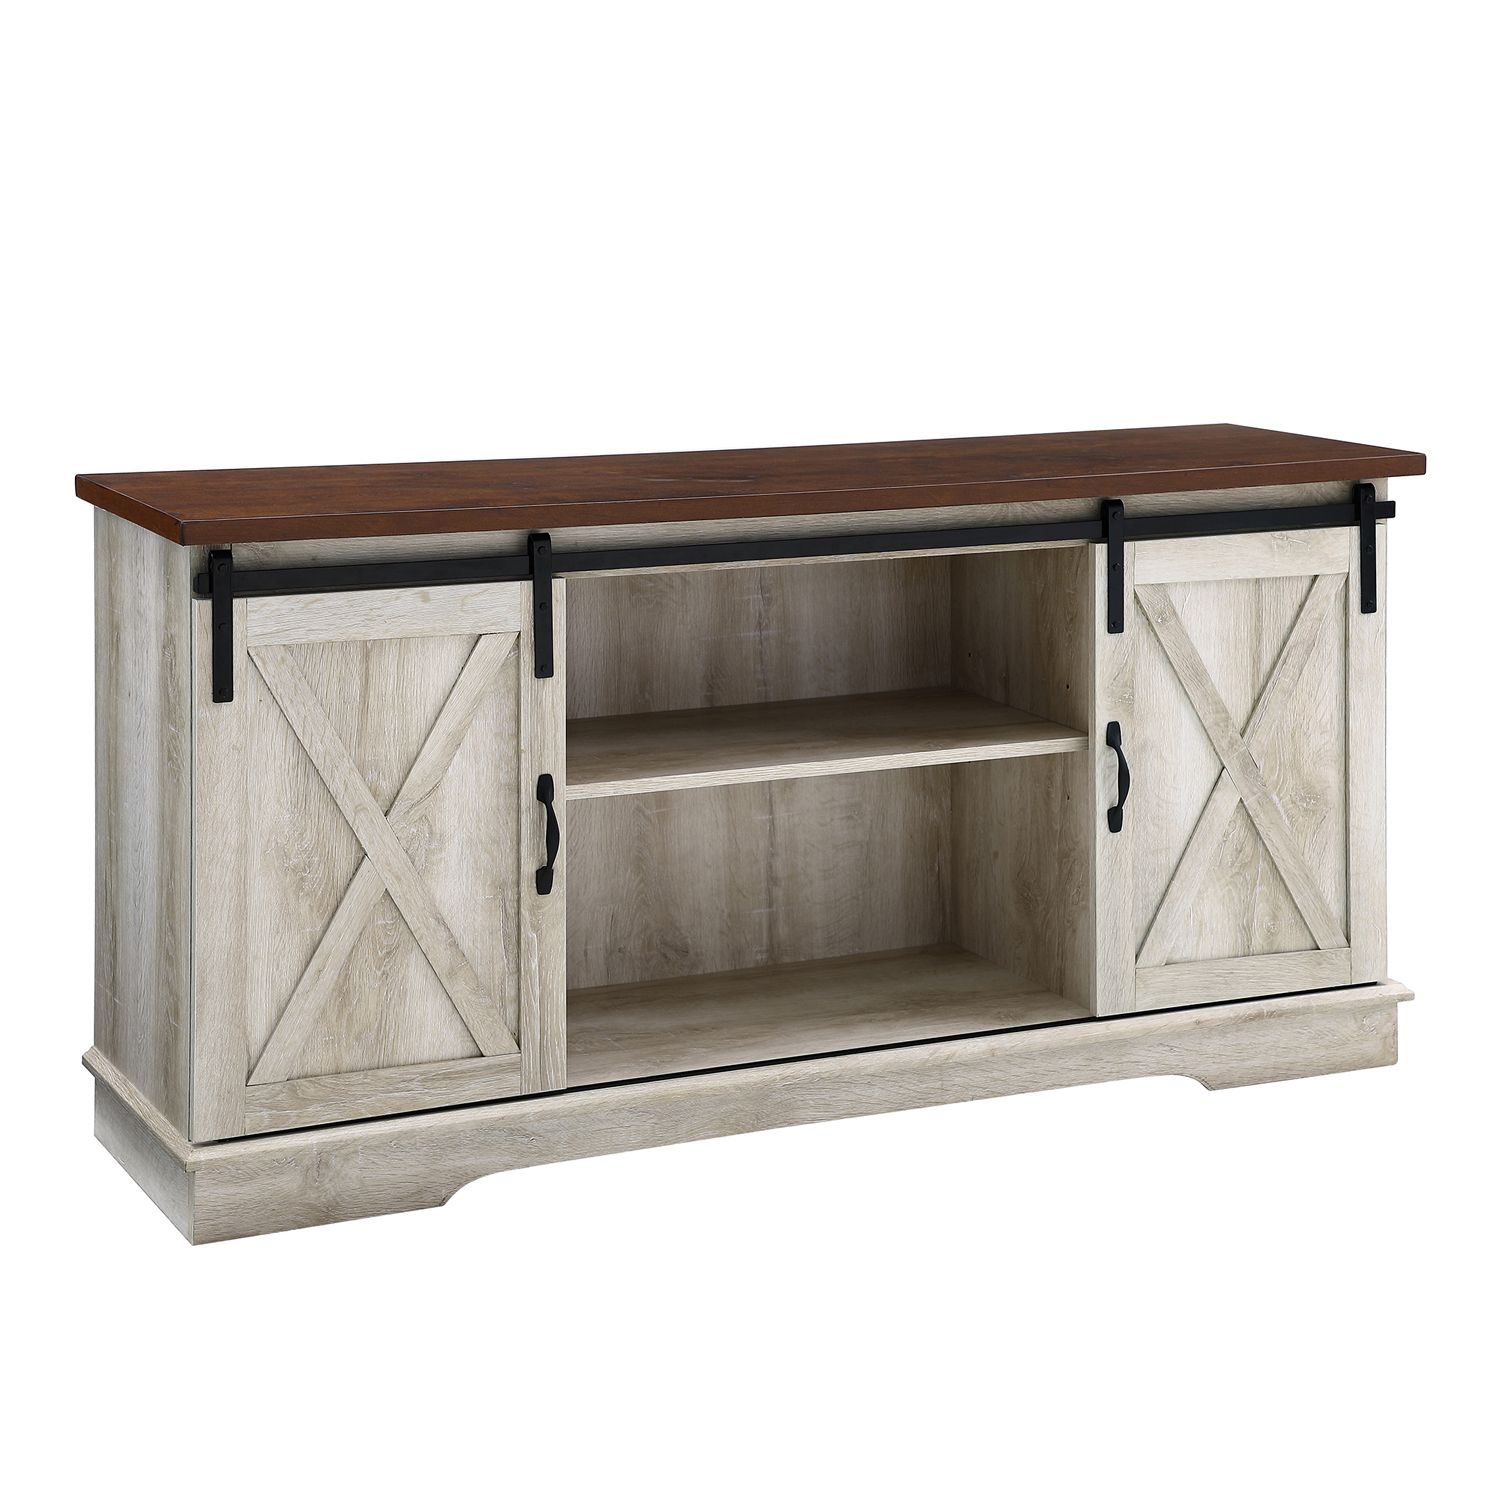 White Oak Farmhouse Sliding Barn Door Tv Stand – Pier1 Imports With Barn Door Media Tv Stands (Gallery 15 of 20)